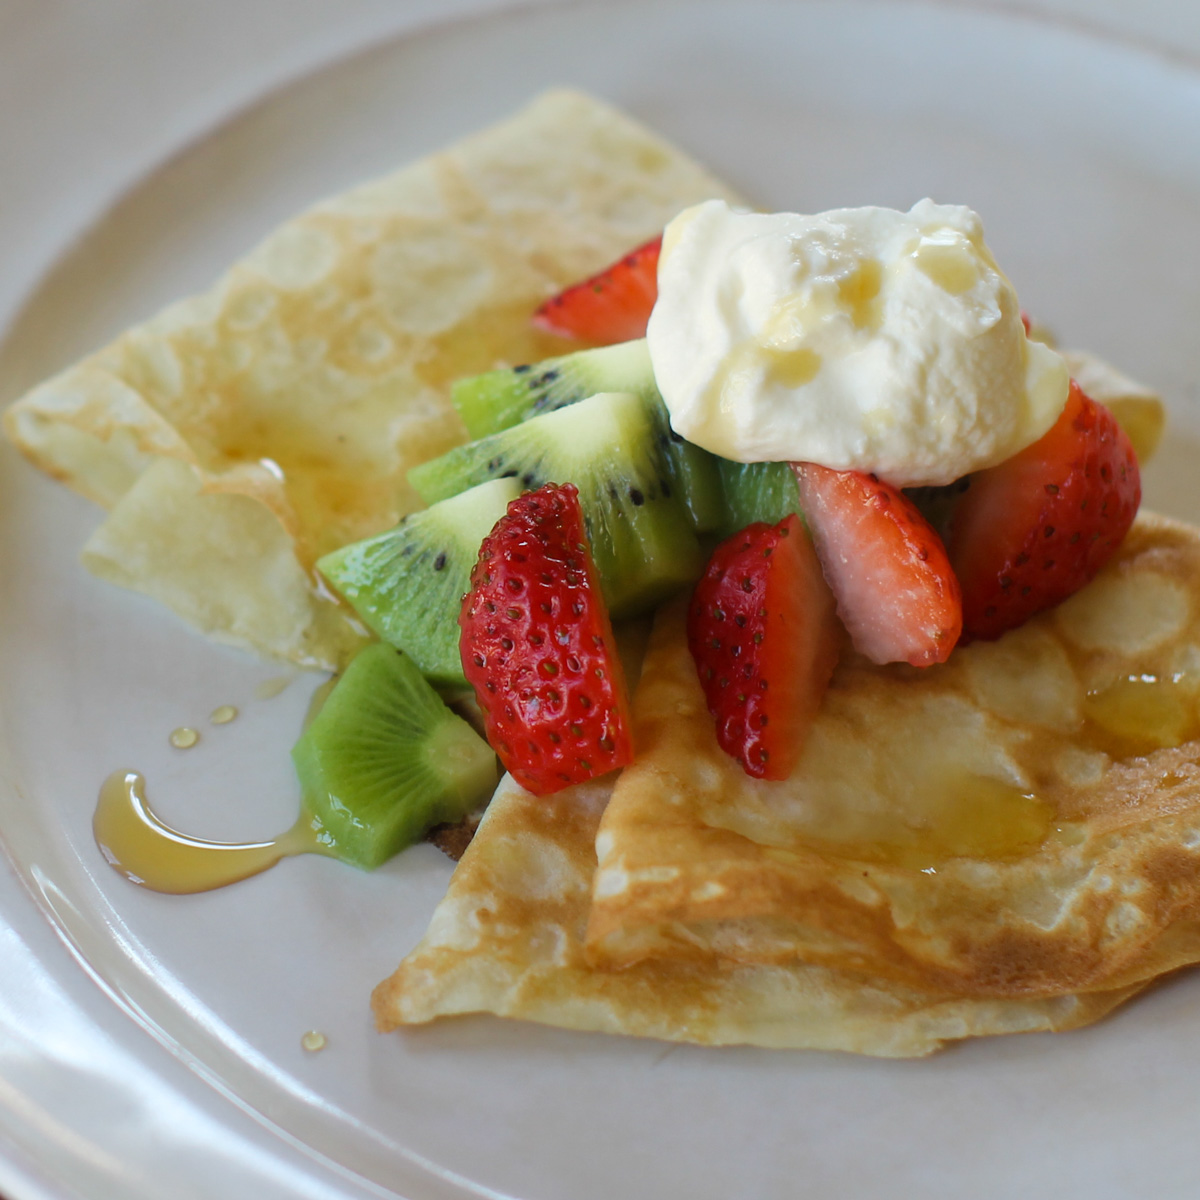 Crepes folded and topped with strawberry, kiwi, fresh whipped cream and a drizzle of maple syrup.